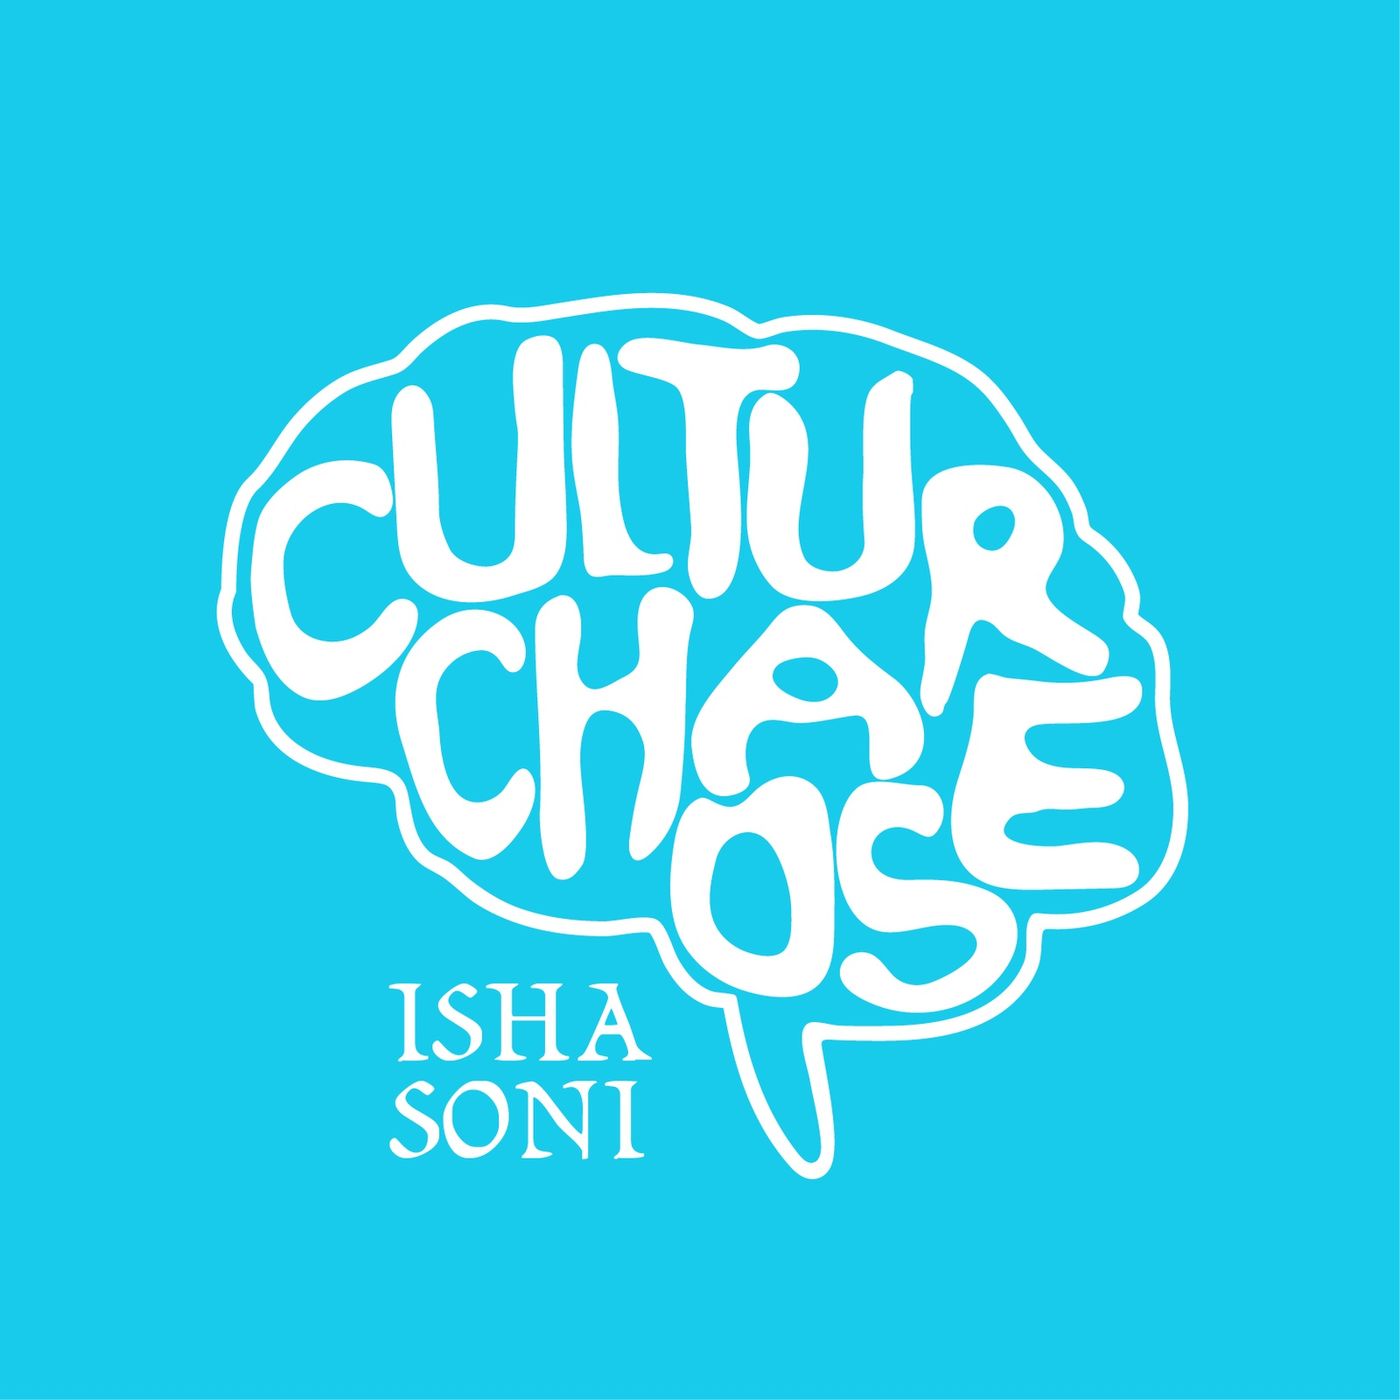 74: Culture Chaos is Back!